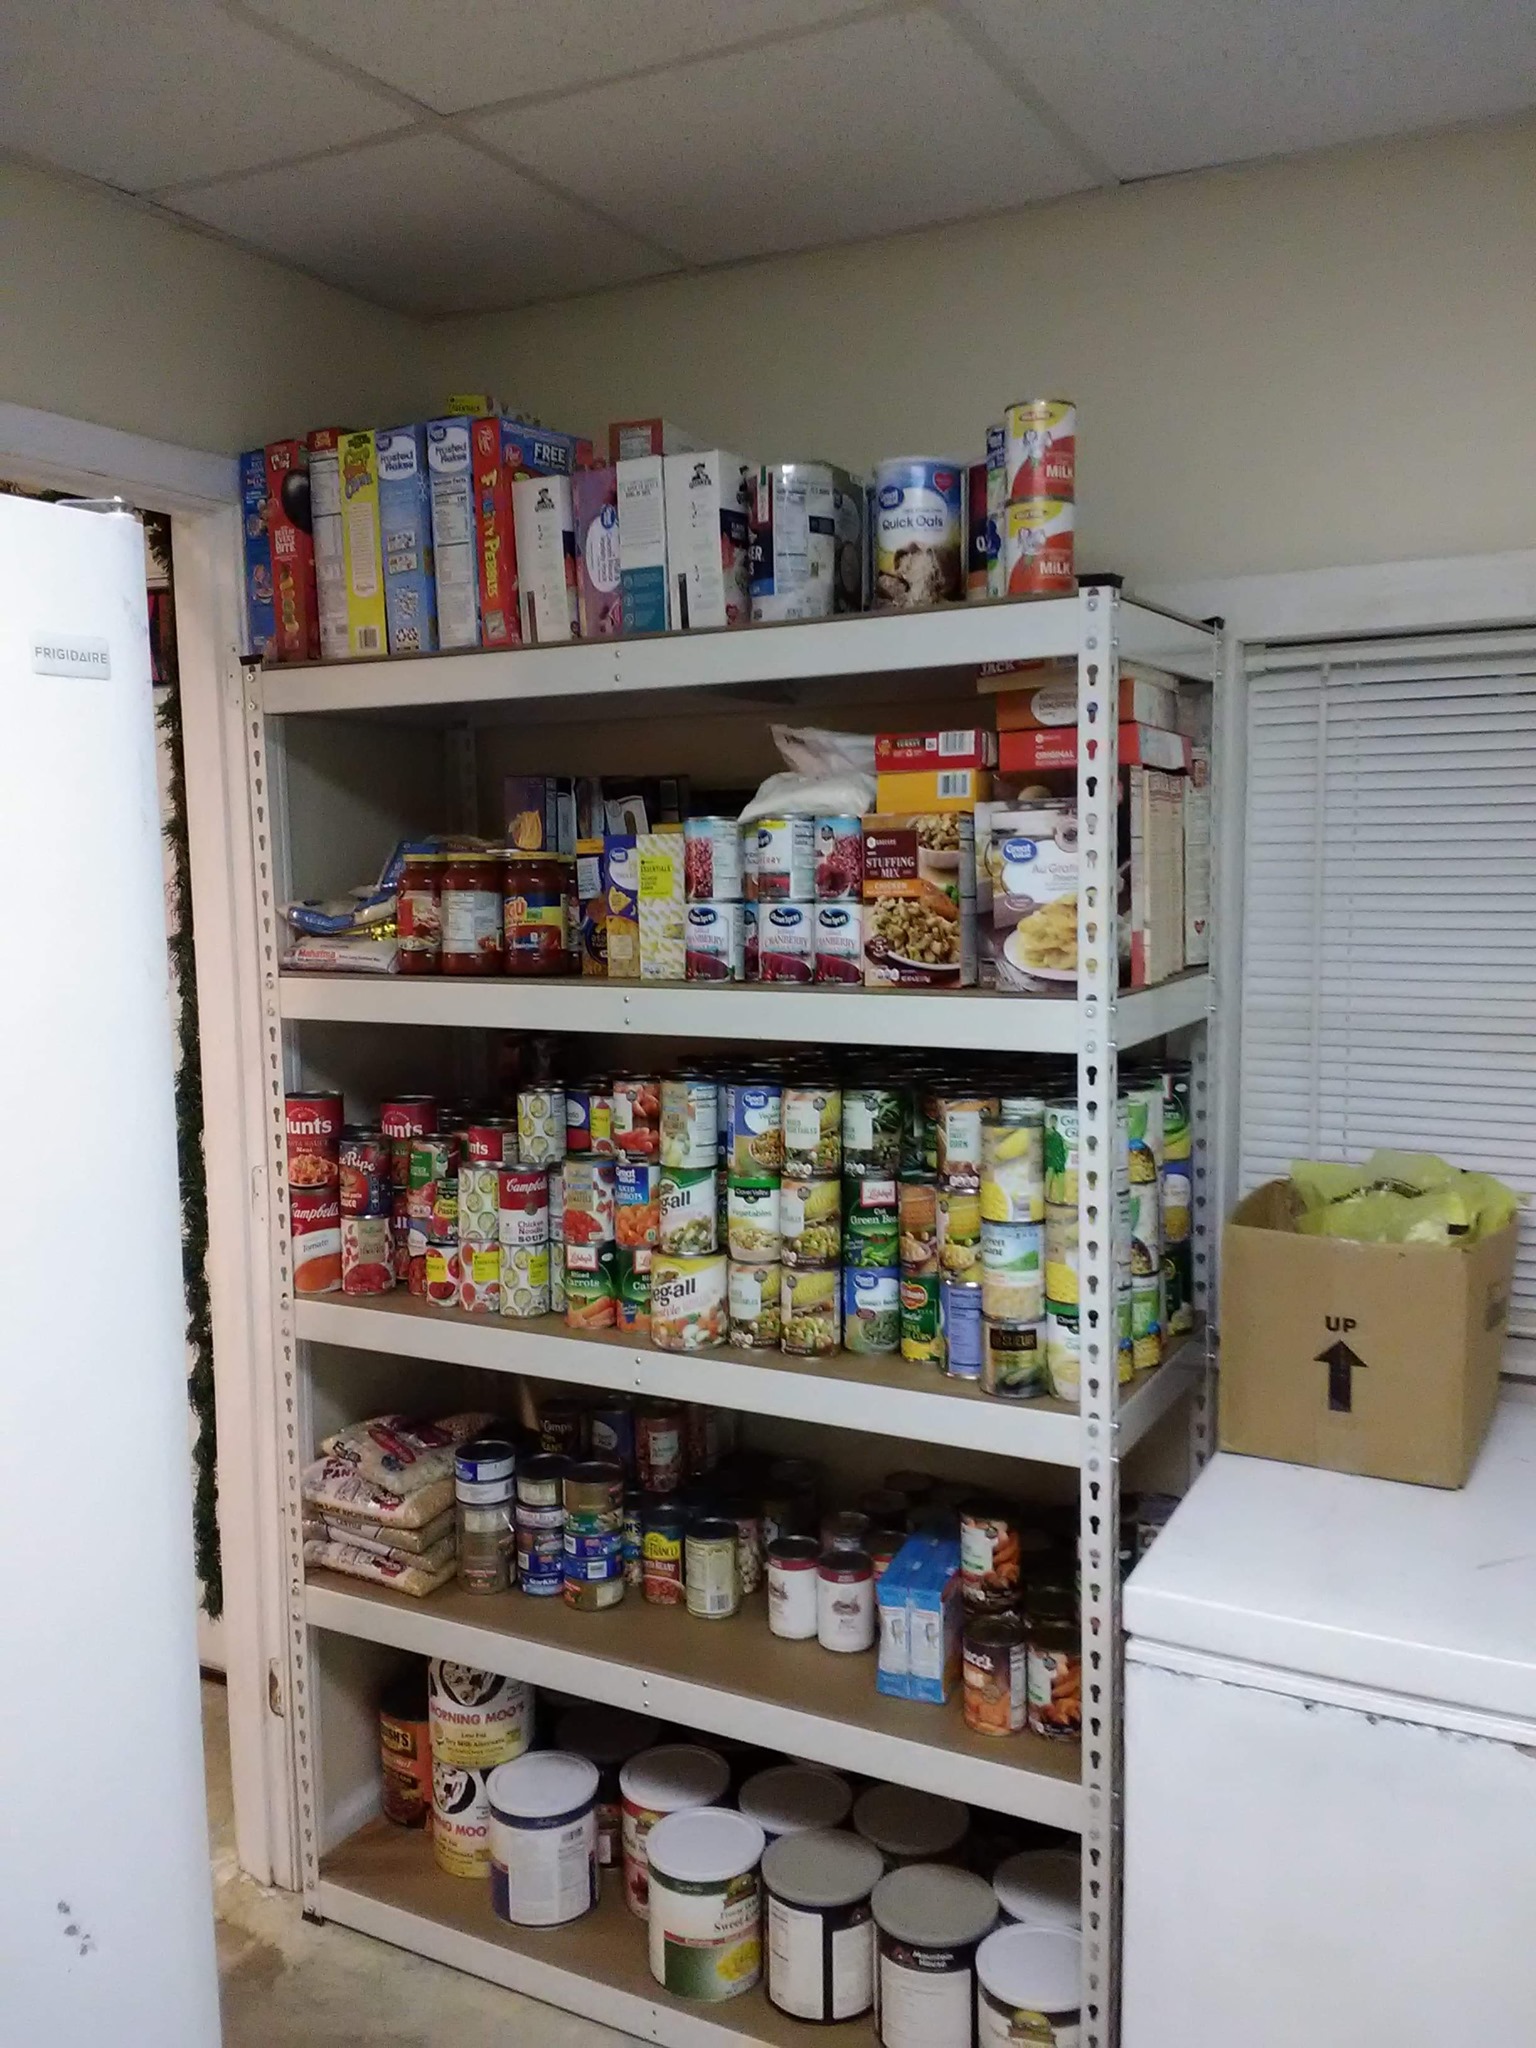 His Works Ministry Food Bank